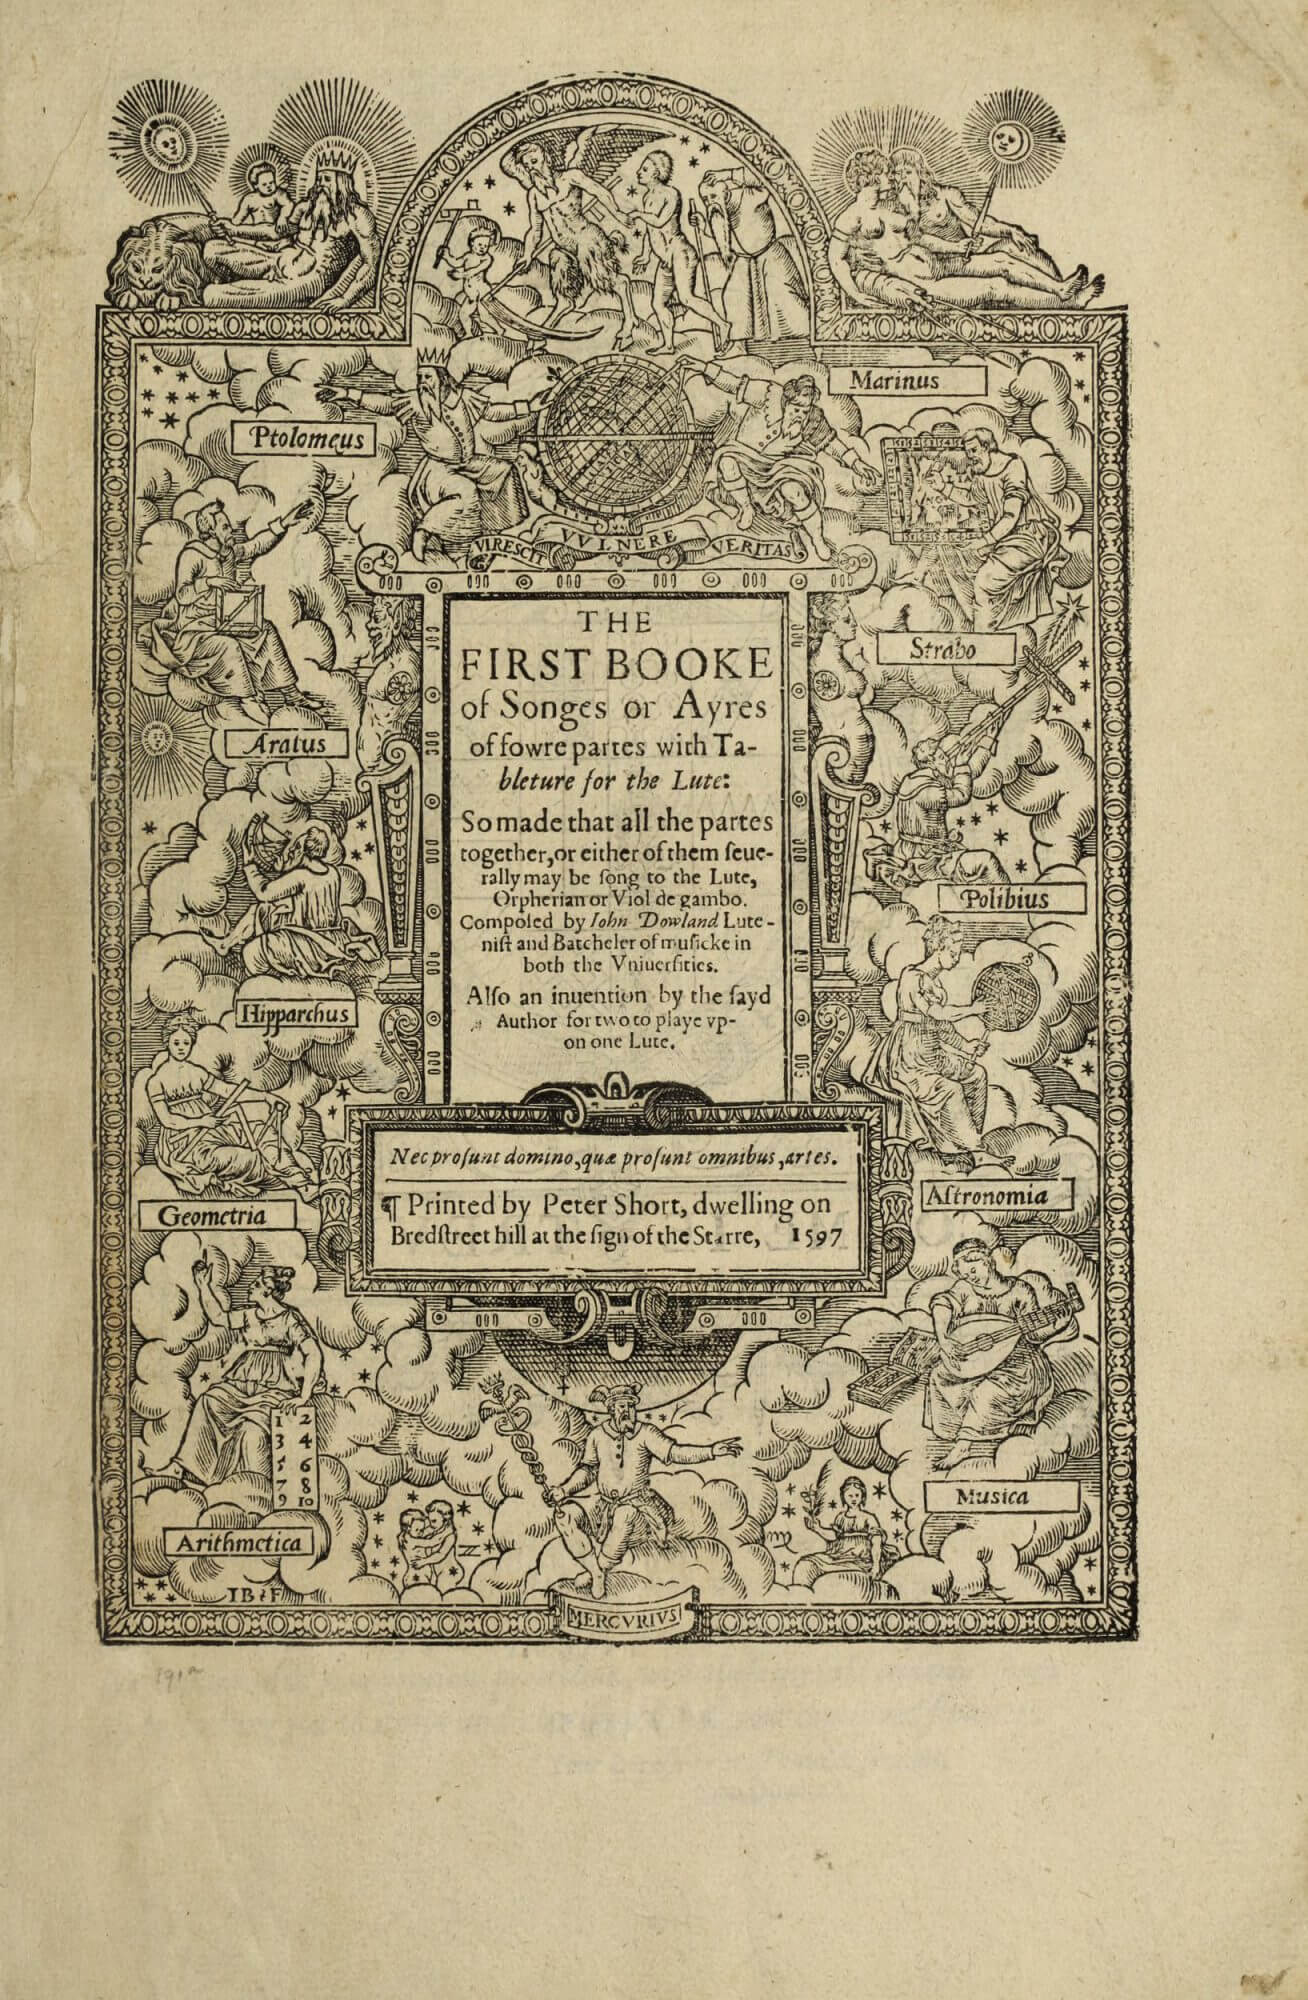 A woodcut title page for John Dowland's collection of songs.